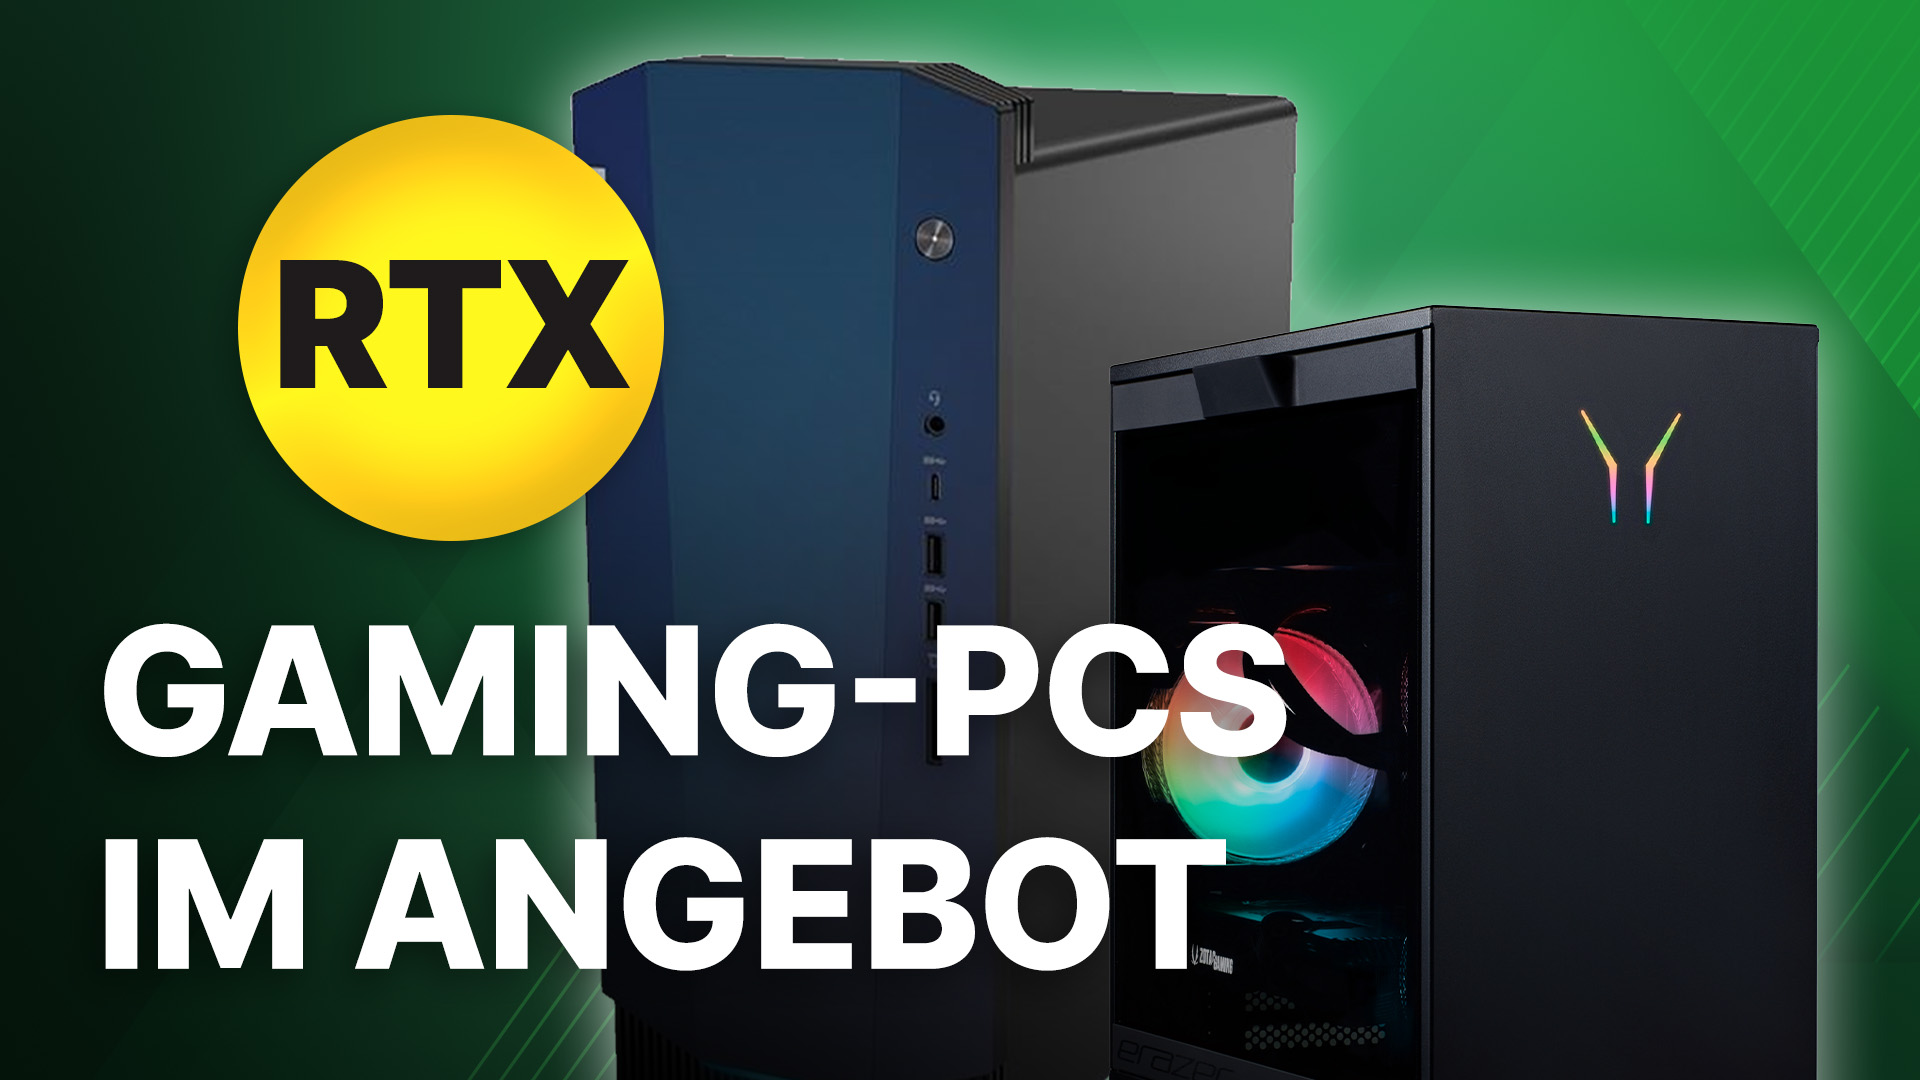 Gaming PCs on sale at Saturn: With the RTX 3070 and Intel Core i7, you're ready for anything